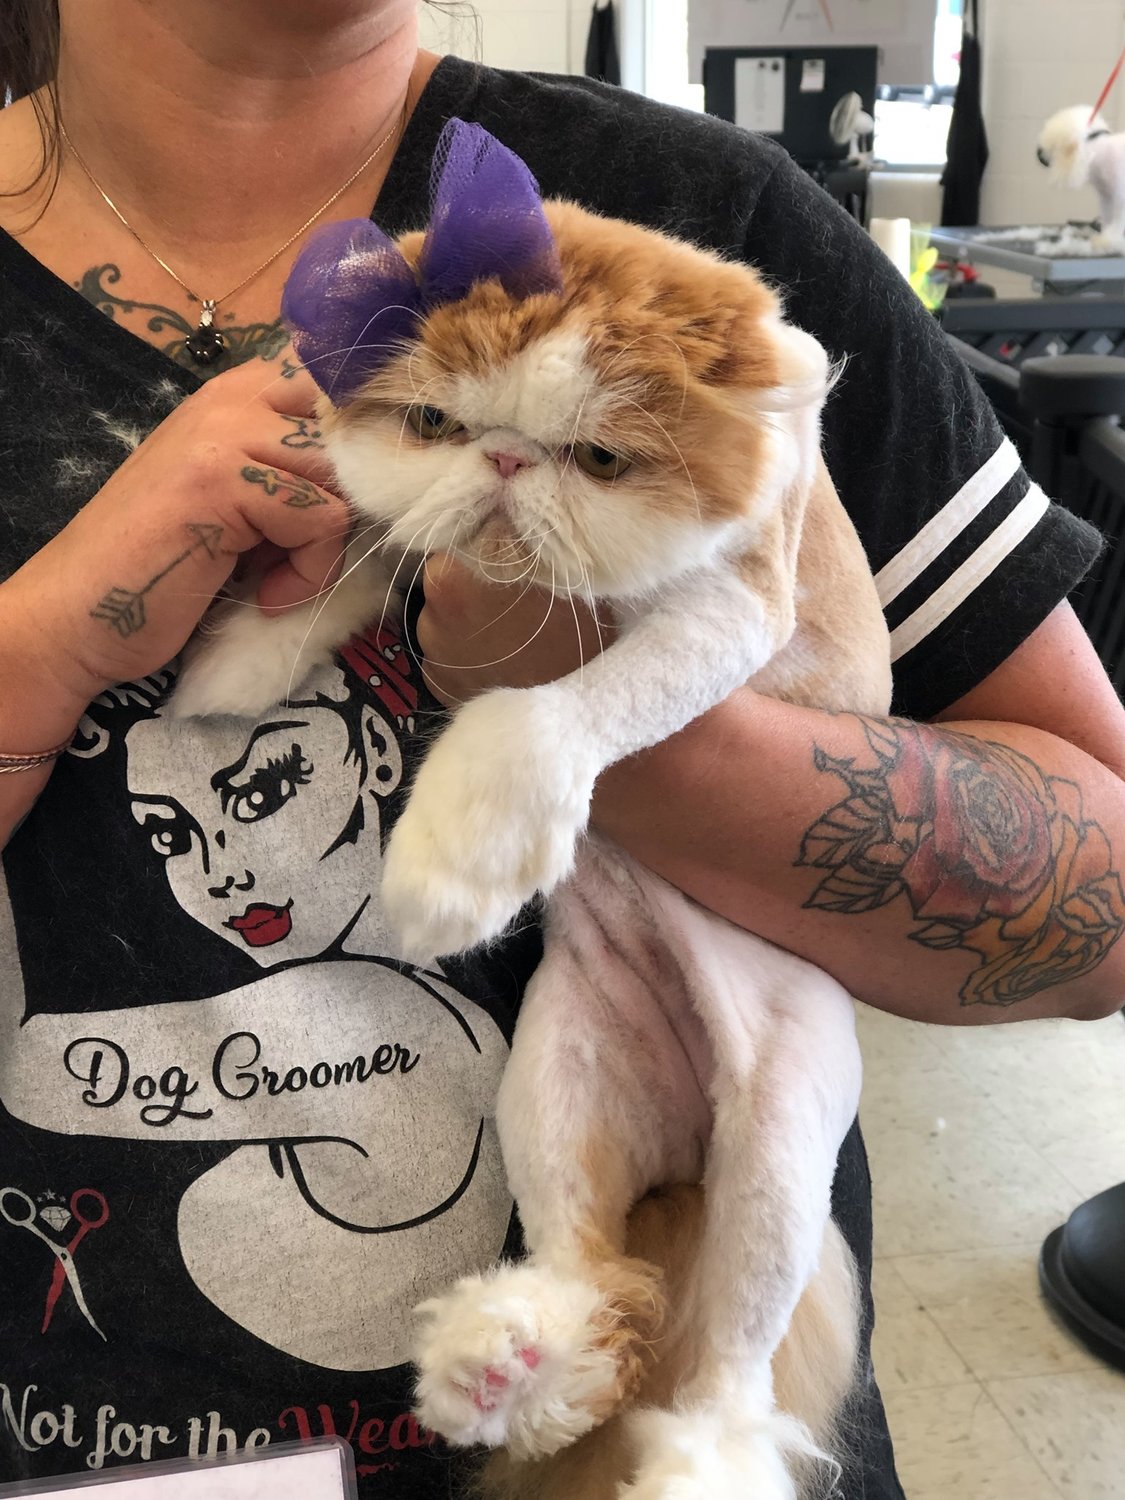 Staff at Wags N’ Whiskers in Battle Ground hold a cat with a bow on its head.